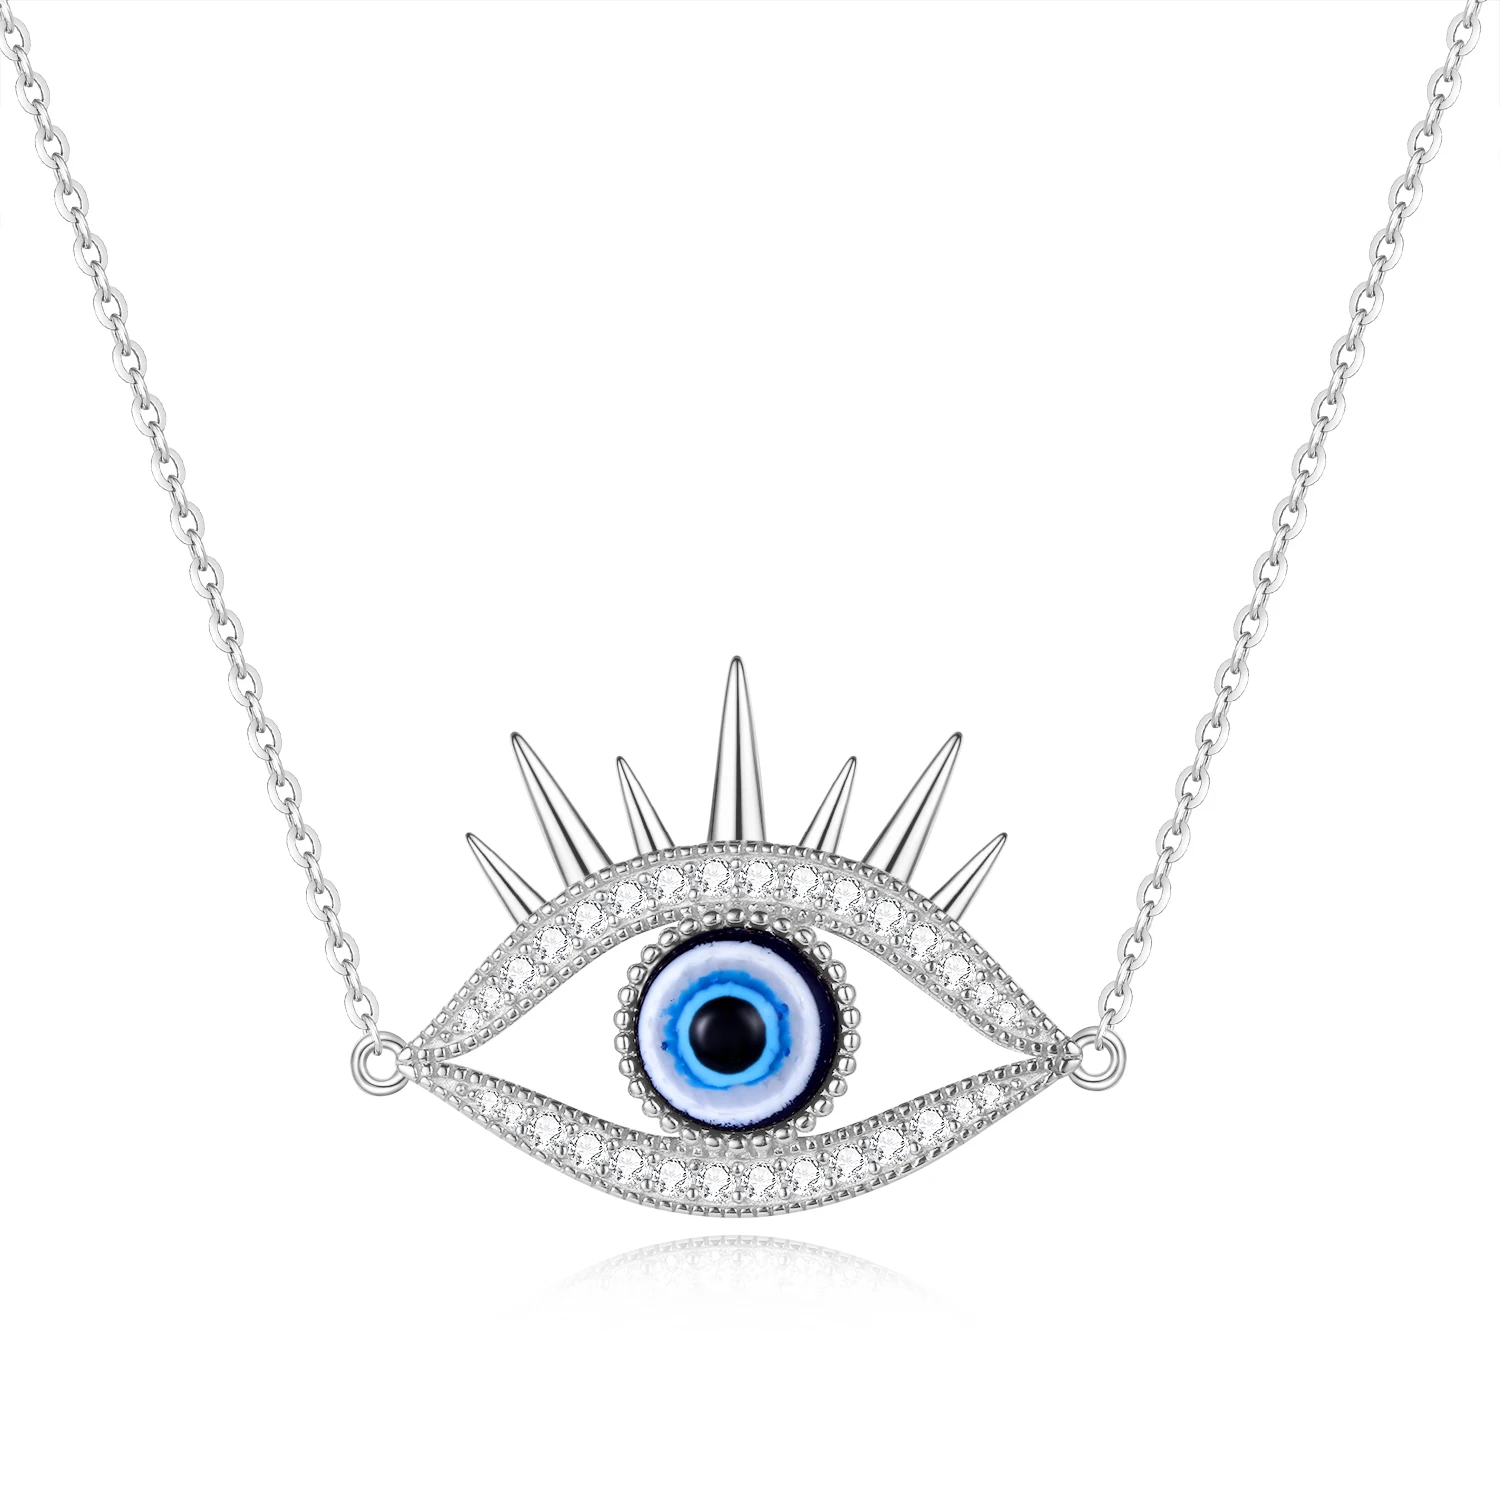 Tongzhe Fashion Blue Evil Eye Necklace 925 Sterling Silver Charm Blue Stone Eye Choker Necklace for Women Turkey Jewlery initial necklace 925 Silver Jewelry